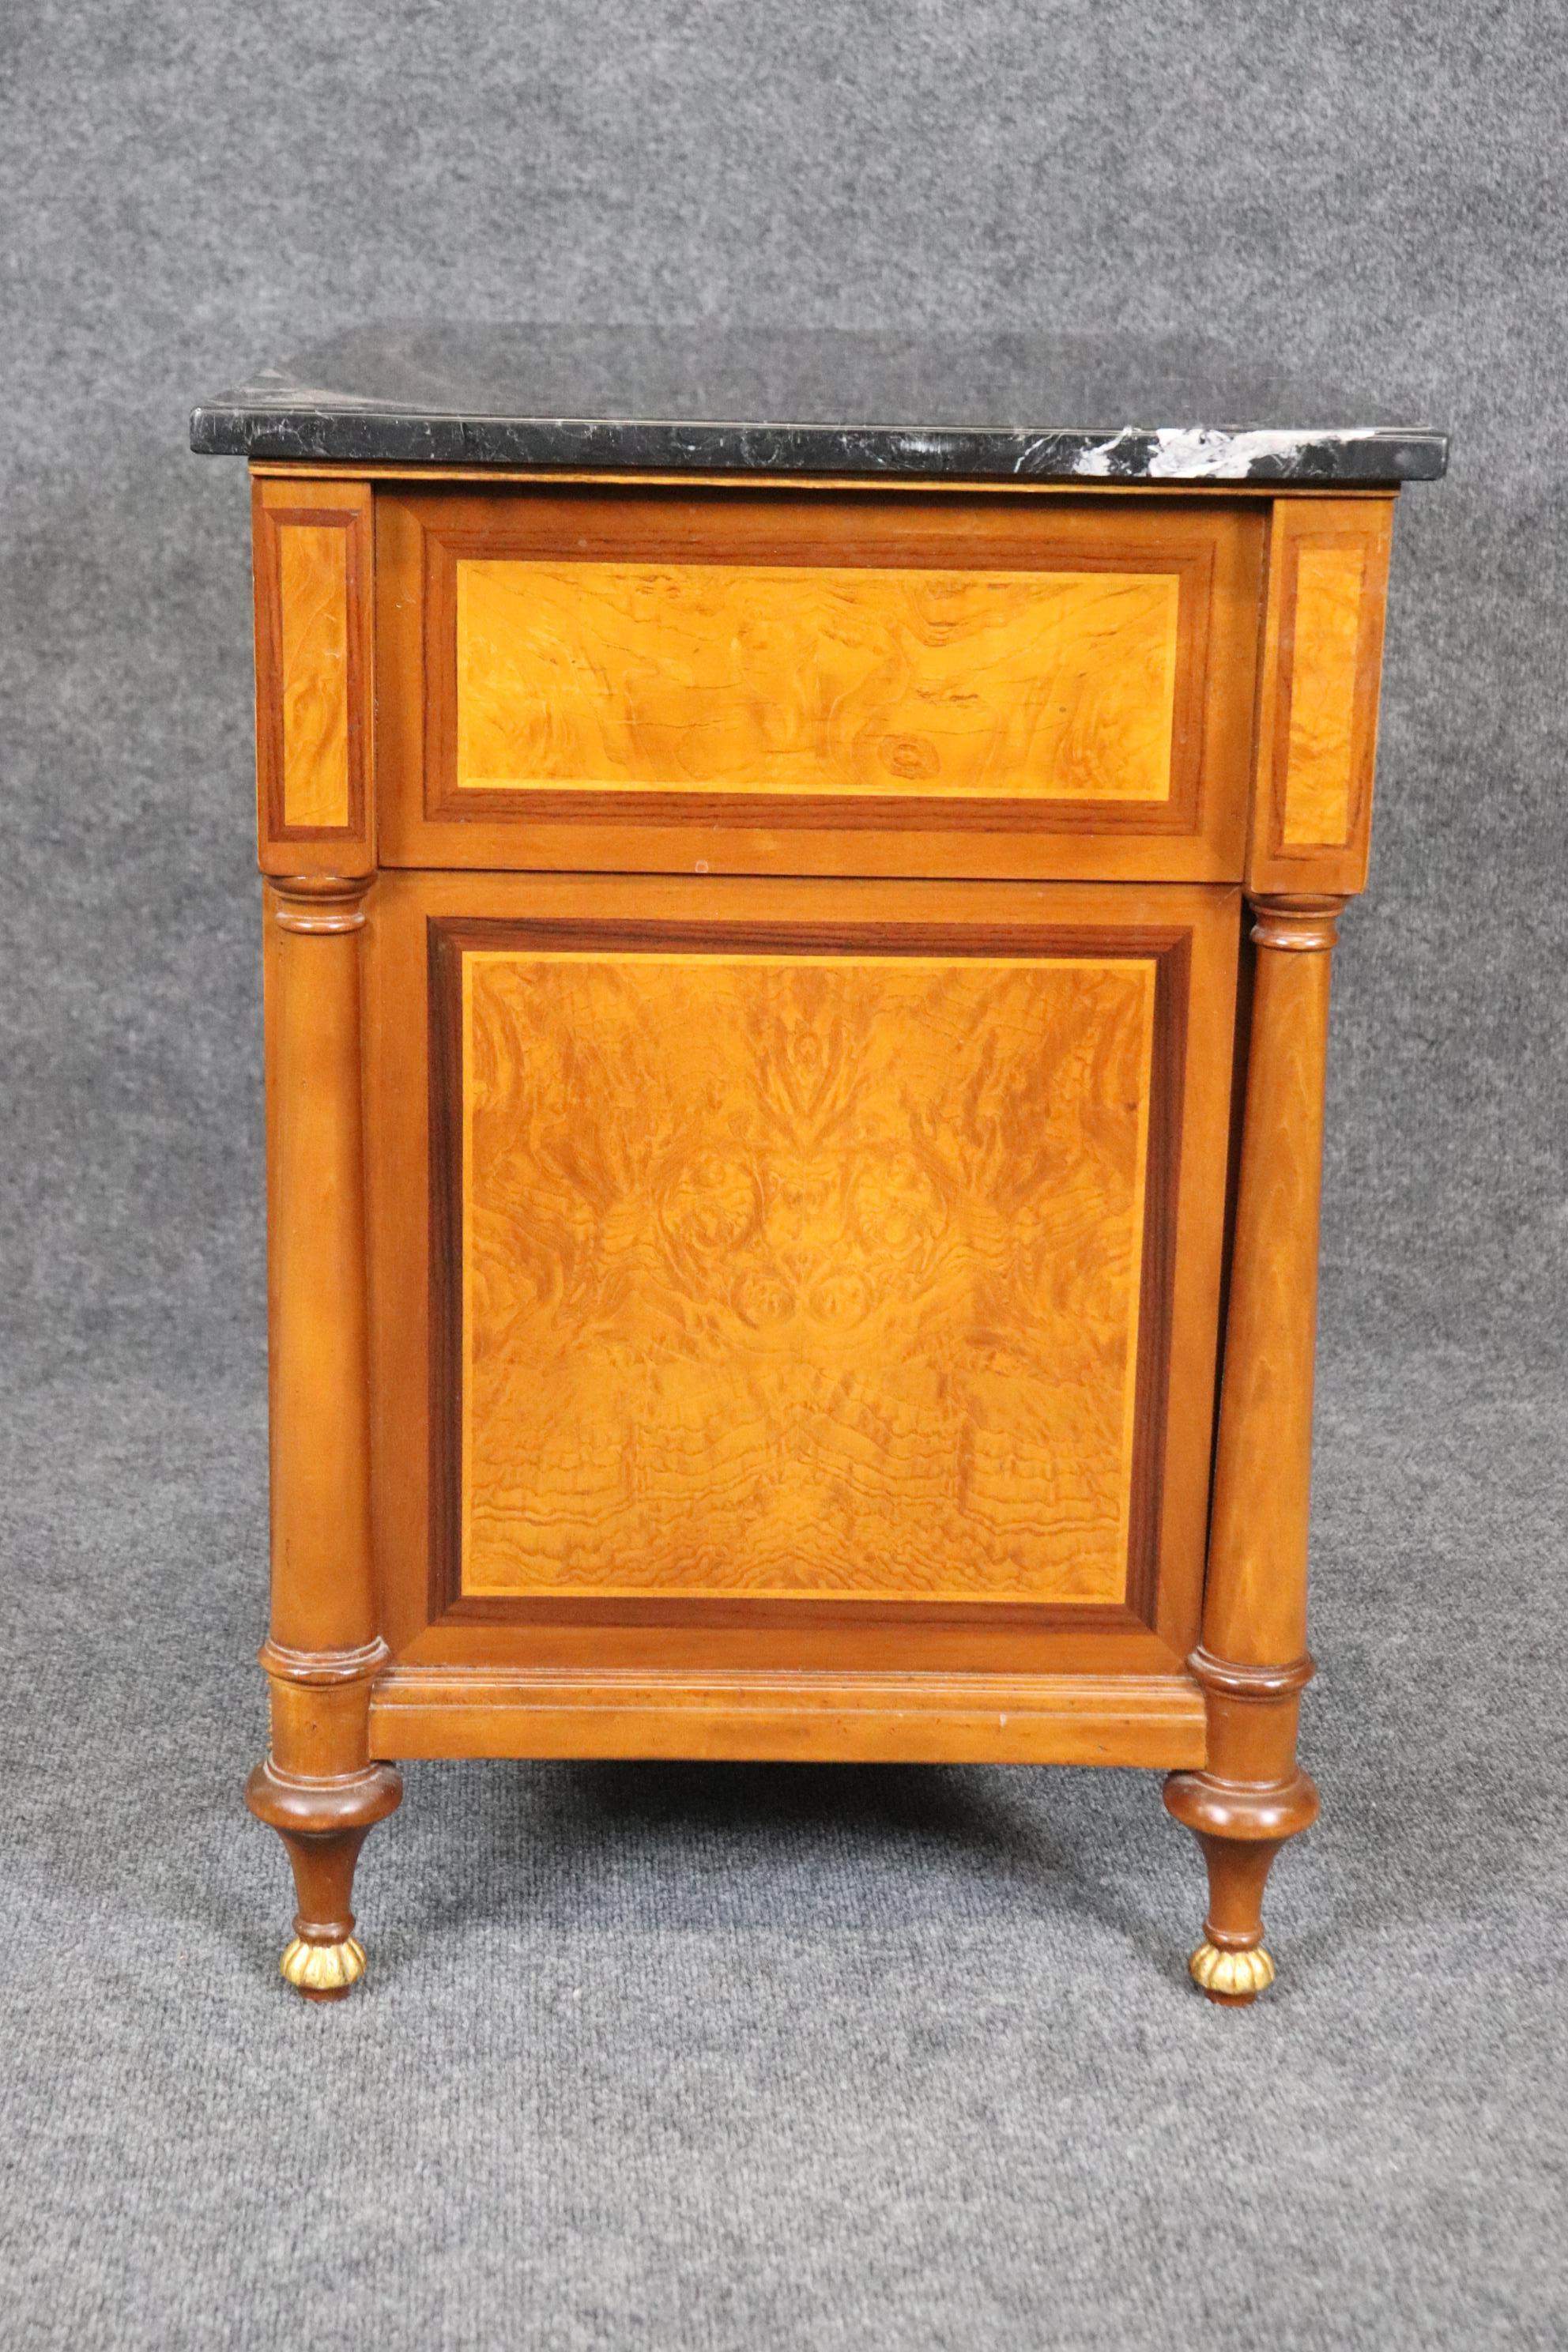 Late 20th Century Solid Cherry Signed Francesco Molon French Directoire Style Marble Nightstand For Sale